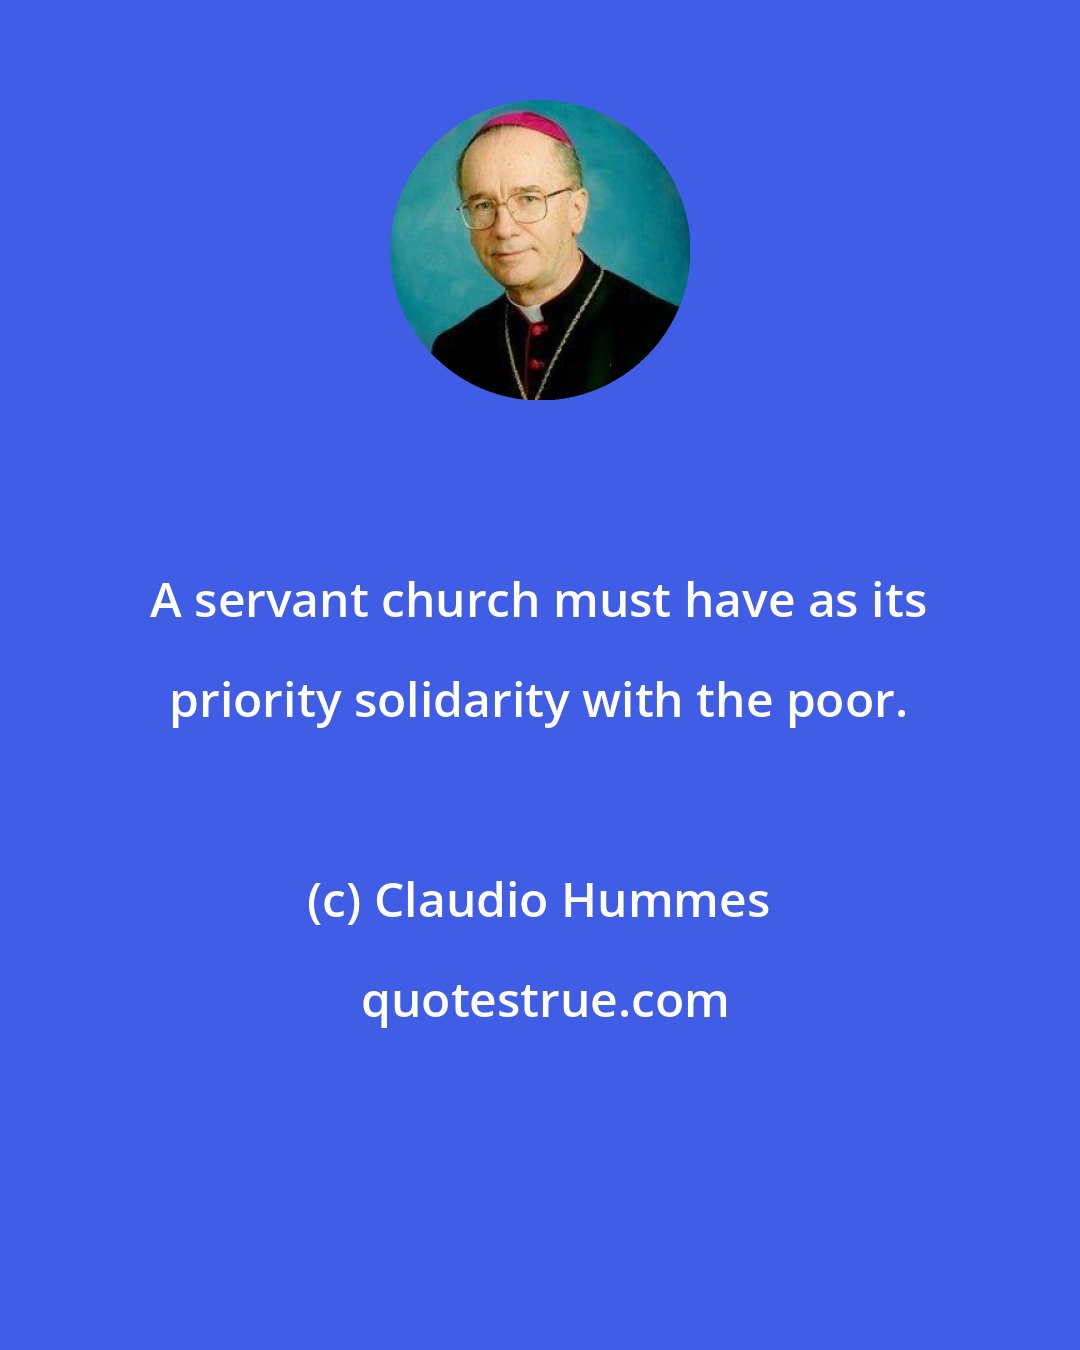 Claudio Hummes: A servant church must have as its priority solidarity with the poor.